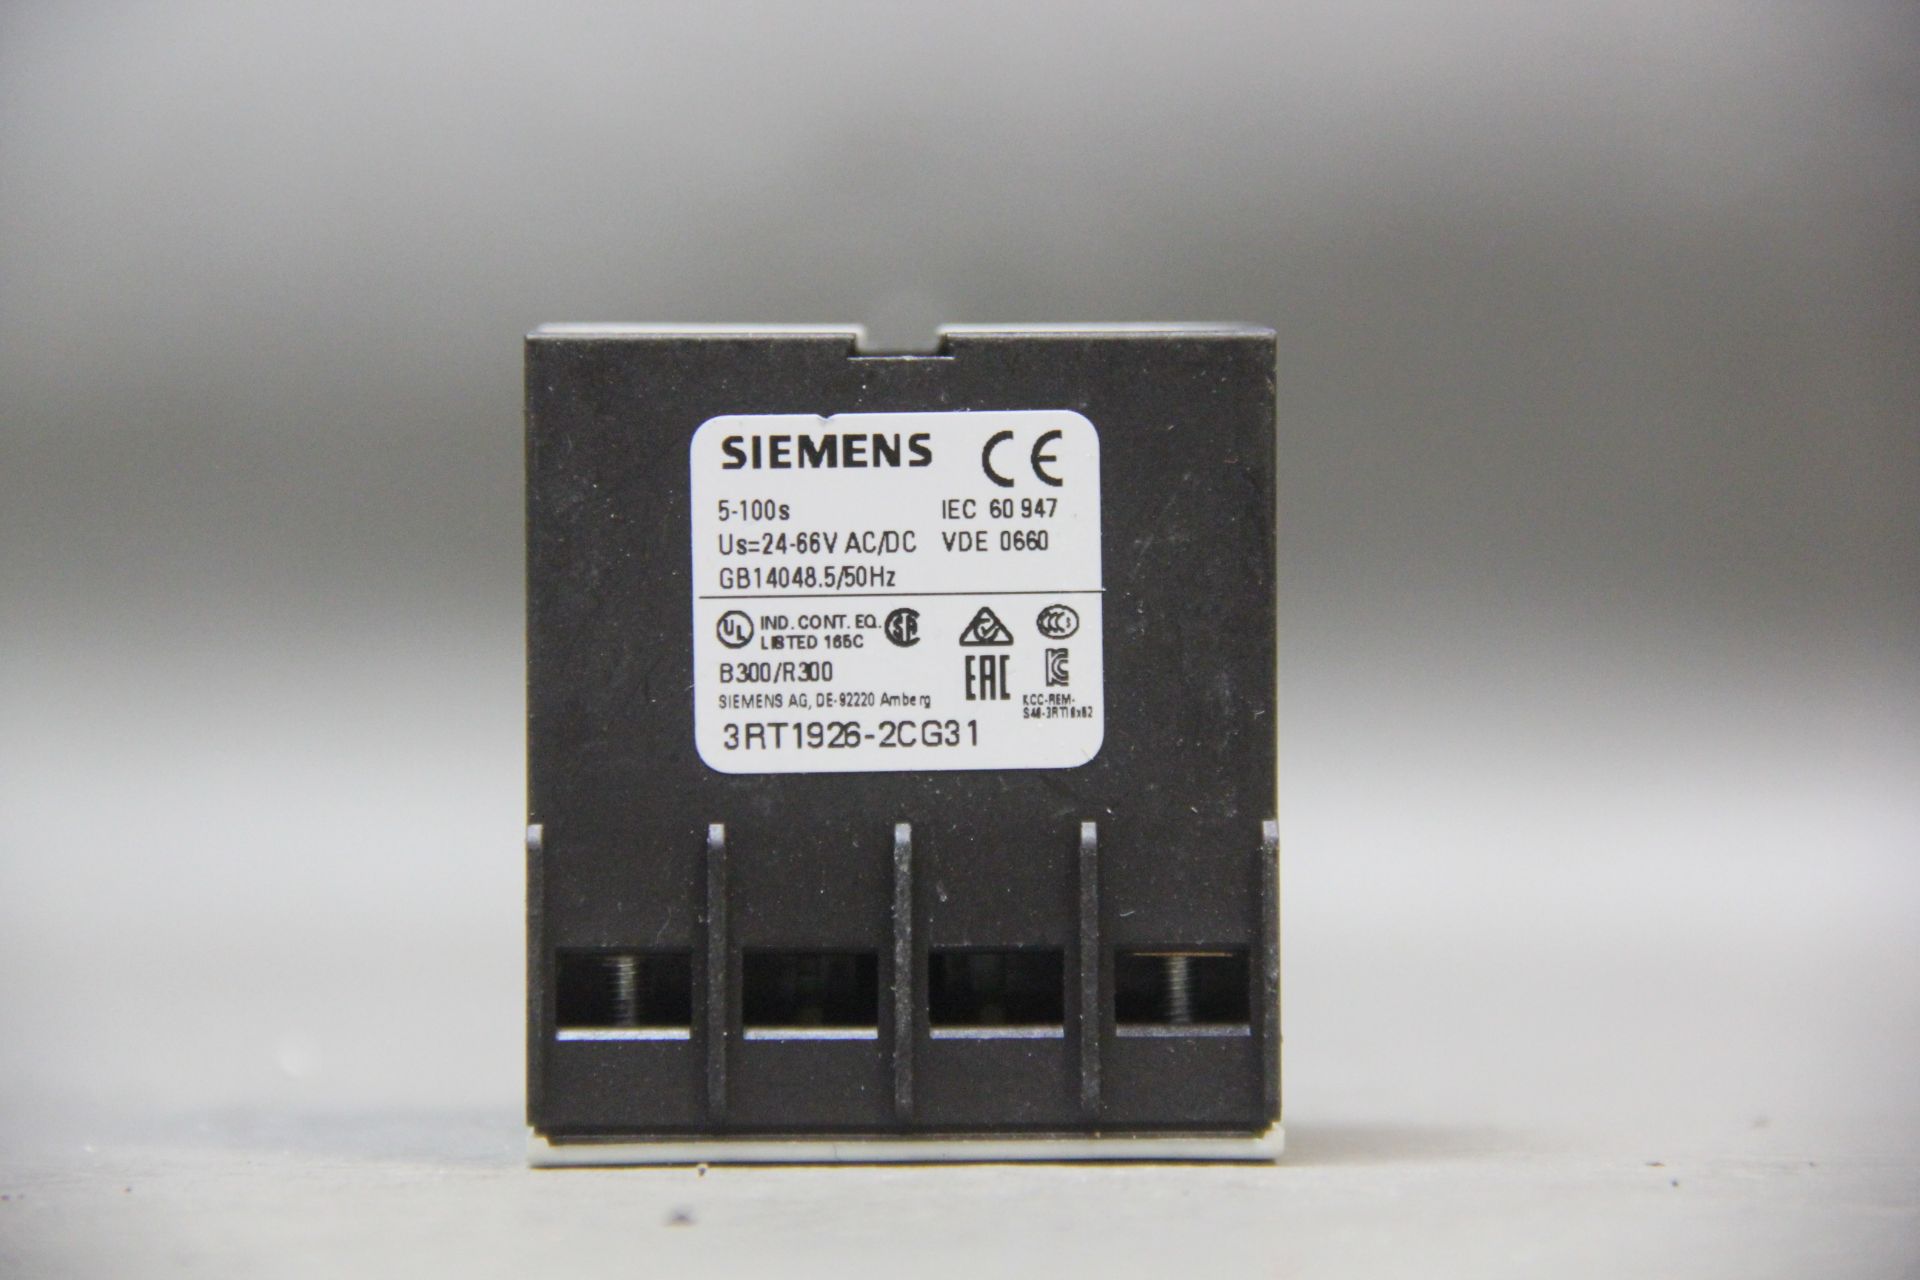 LOT OF UNUSED SIEMENS ELECTRONIC 2 WIRE TIMING RELAYS - Image 3 of 3